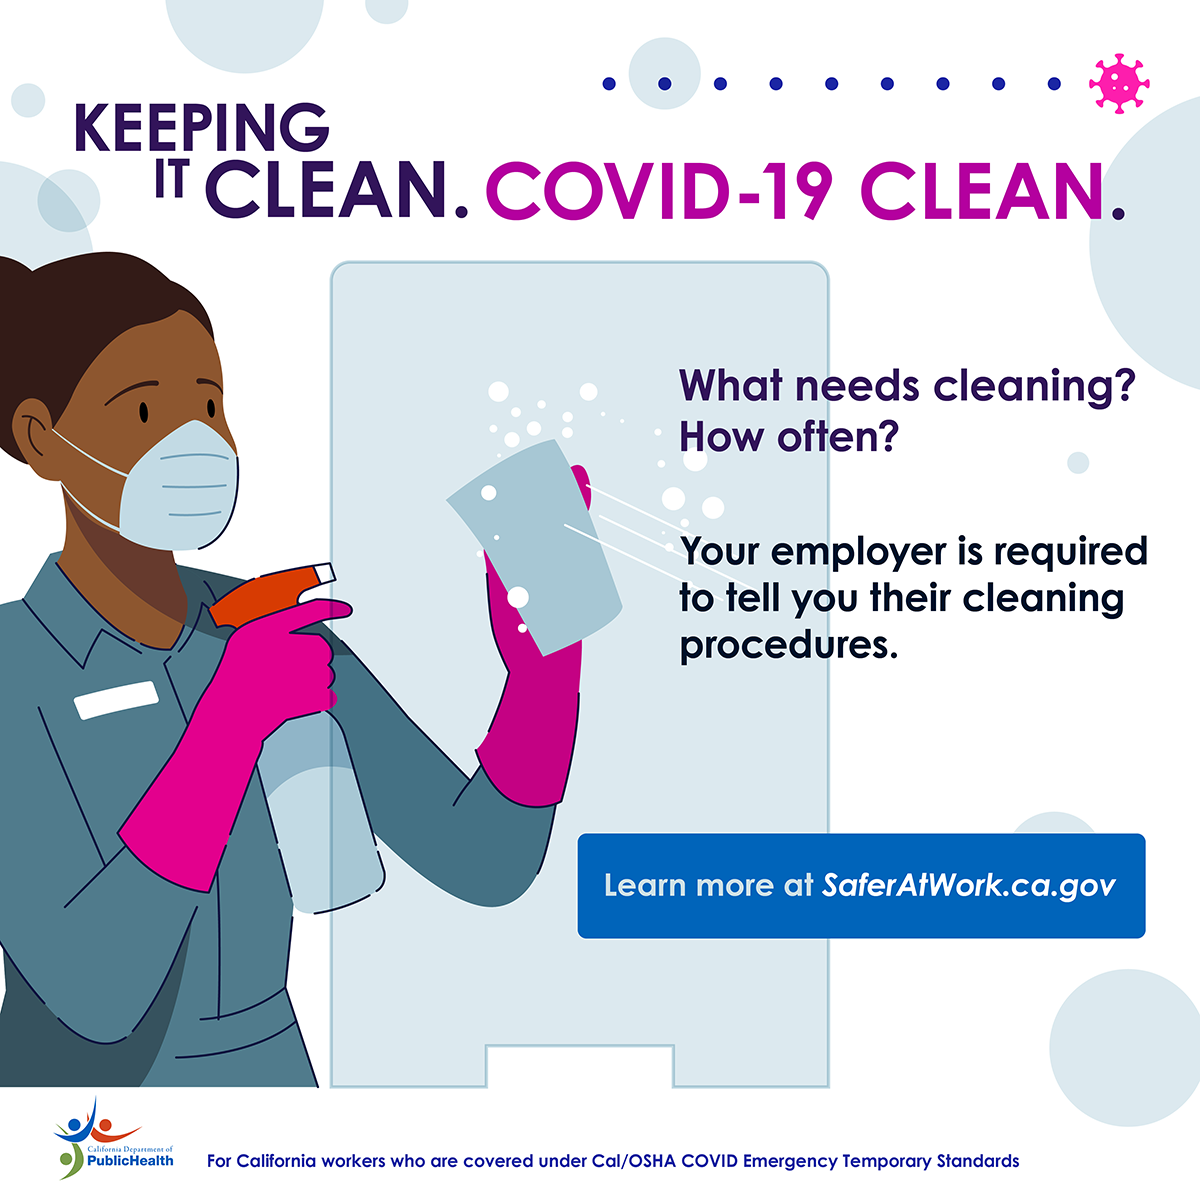 Keeping it COVID-19 clean. Your employer is required to tell you their cleaning procedures.